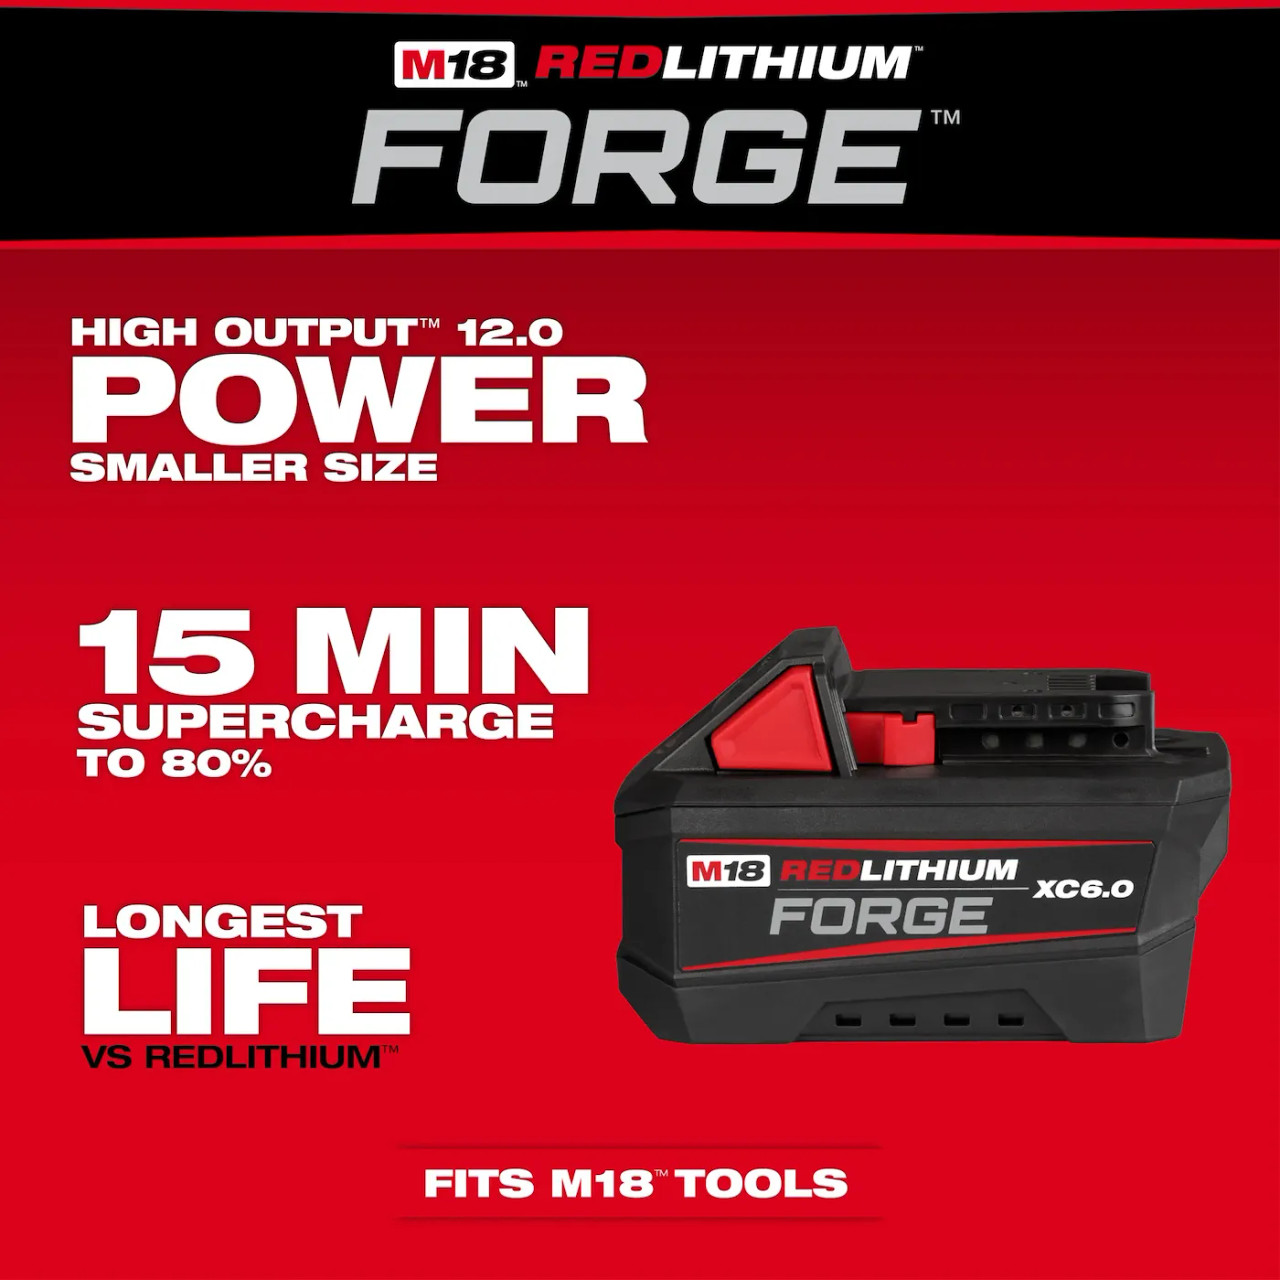 Milwaukee M18 REDLITHIUM FORGE XC6.0 Extended Capacity Battery Pack 48-11-1861